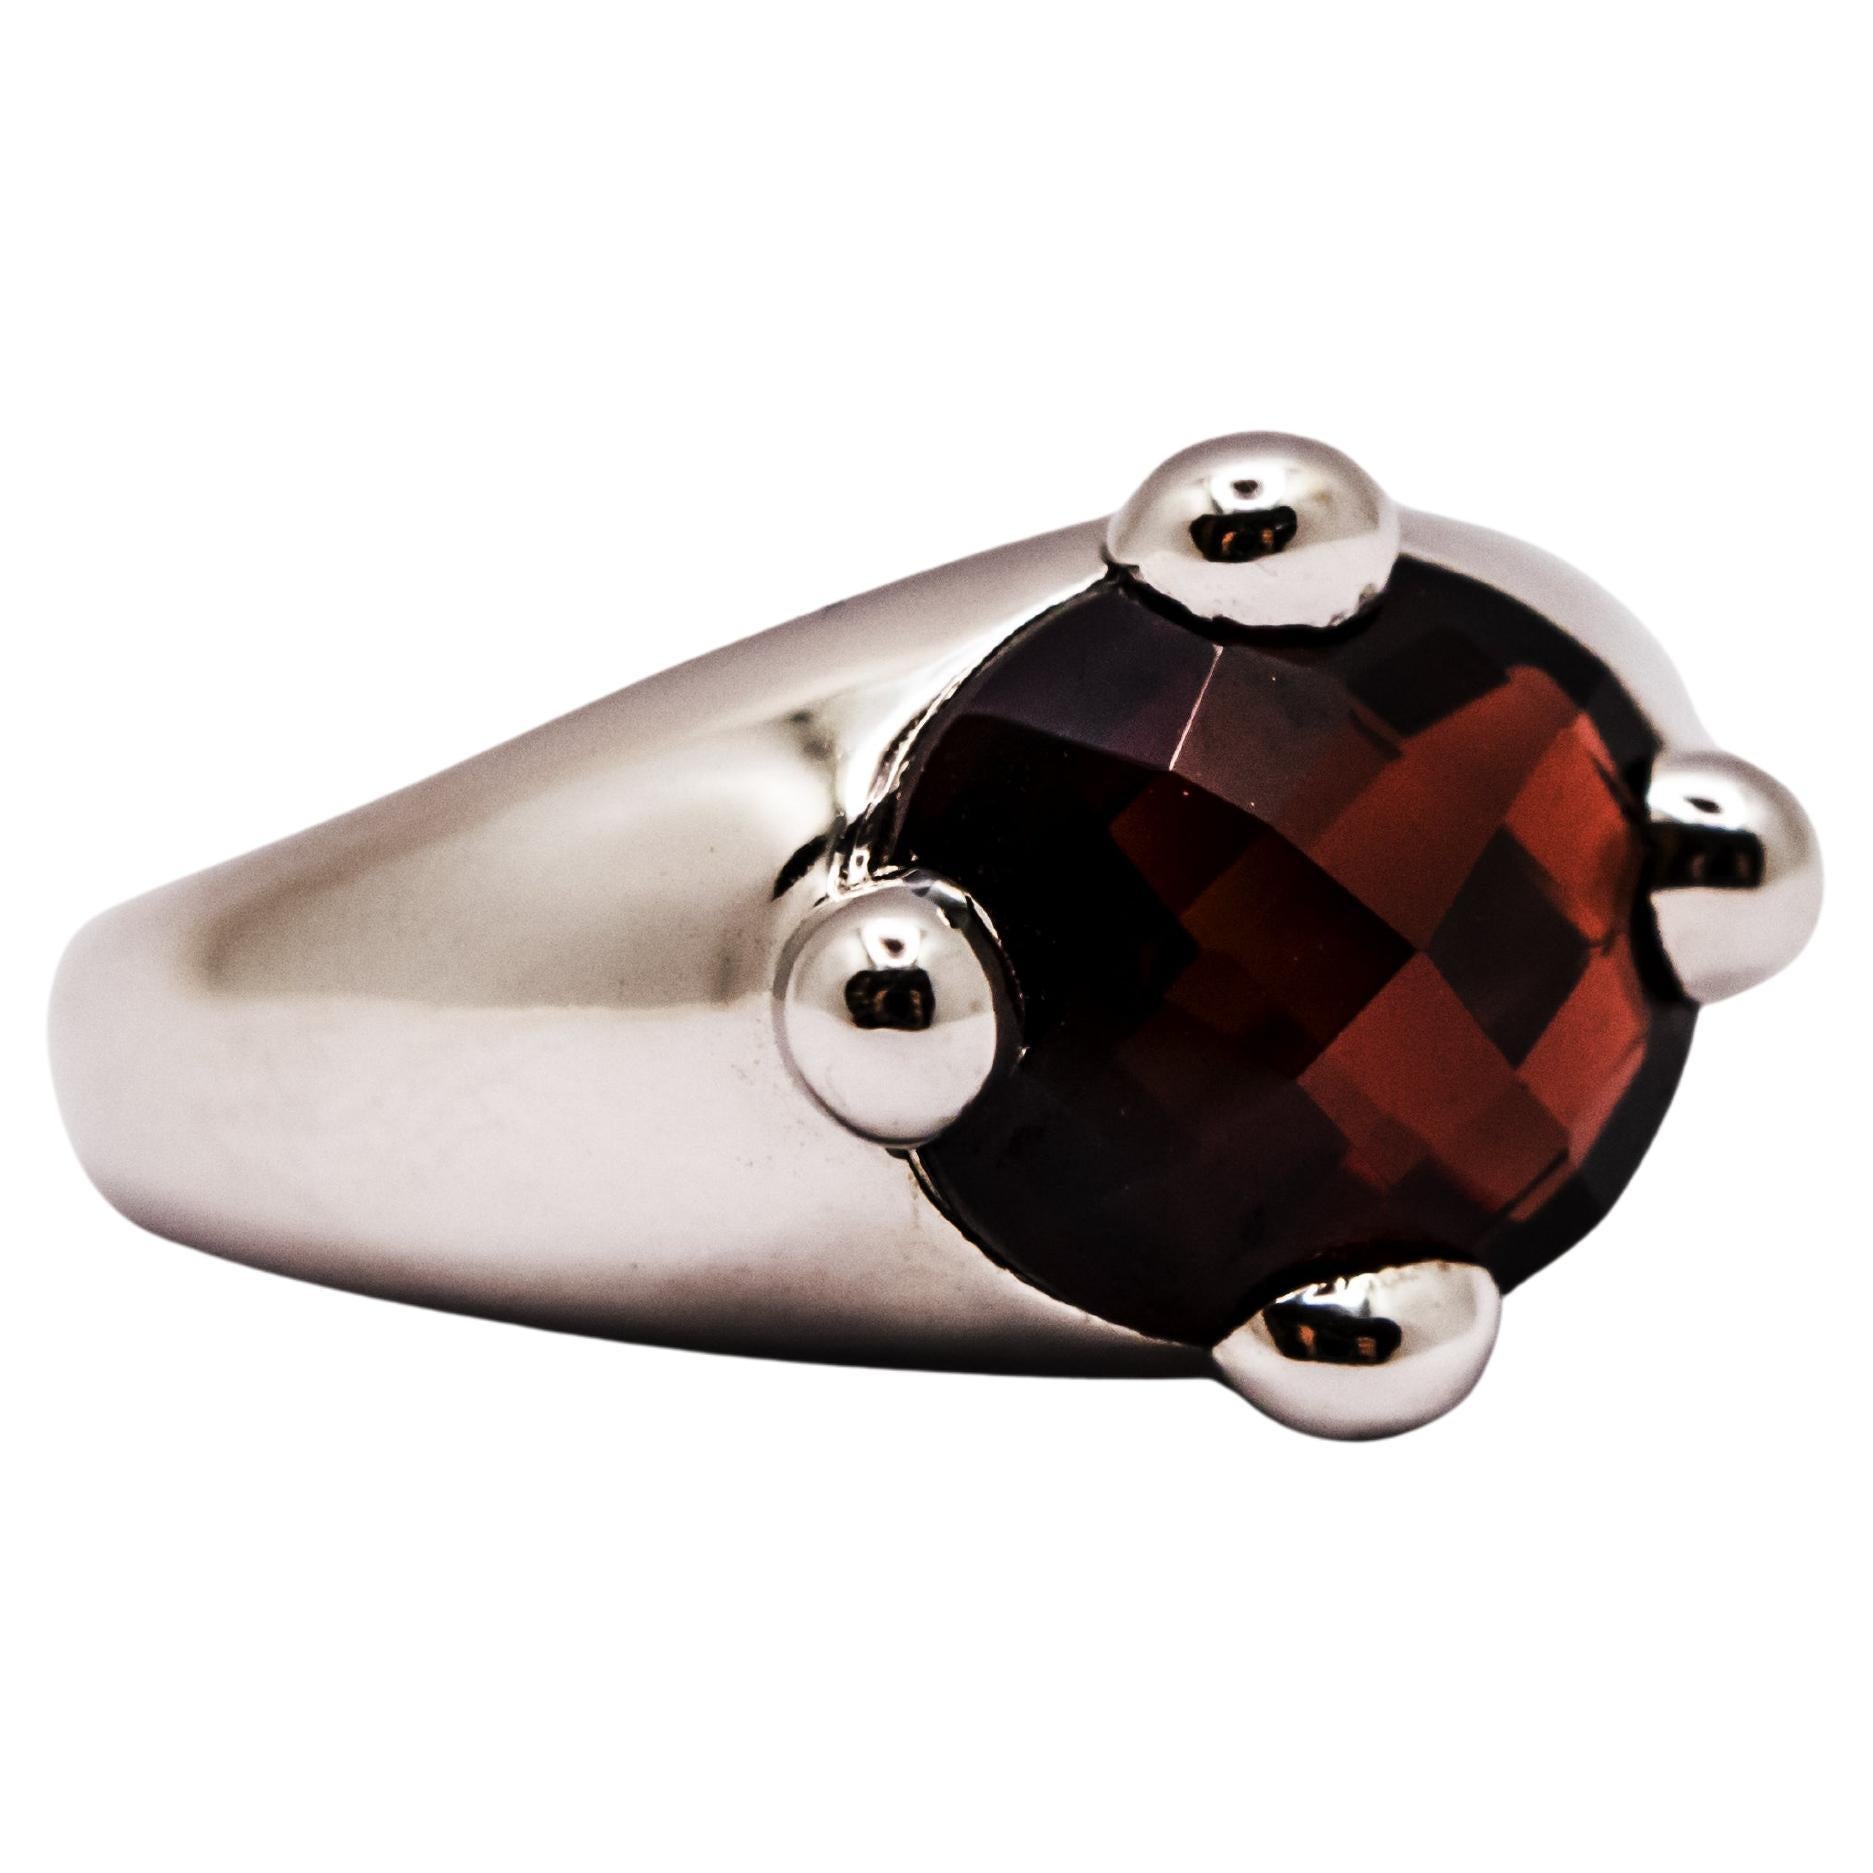 A 1990s design ring in solid 18 kt white gold weighing 9.30 g.
Embellished with a beautiful garnet that is dark red and transparent at the same time and has an oval faceted cut.
The unusual cut of the stone, the contrasting red and white colors, and